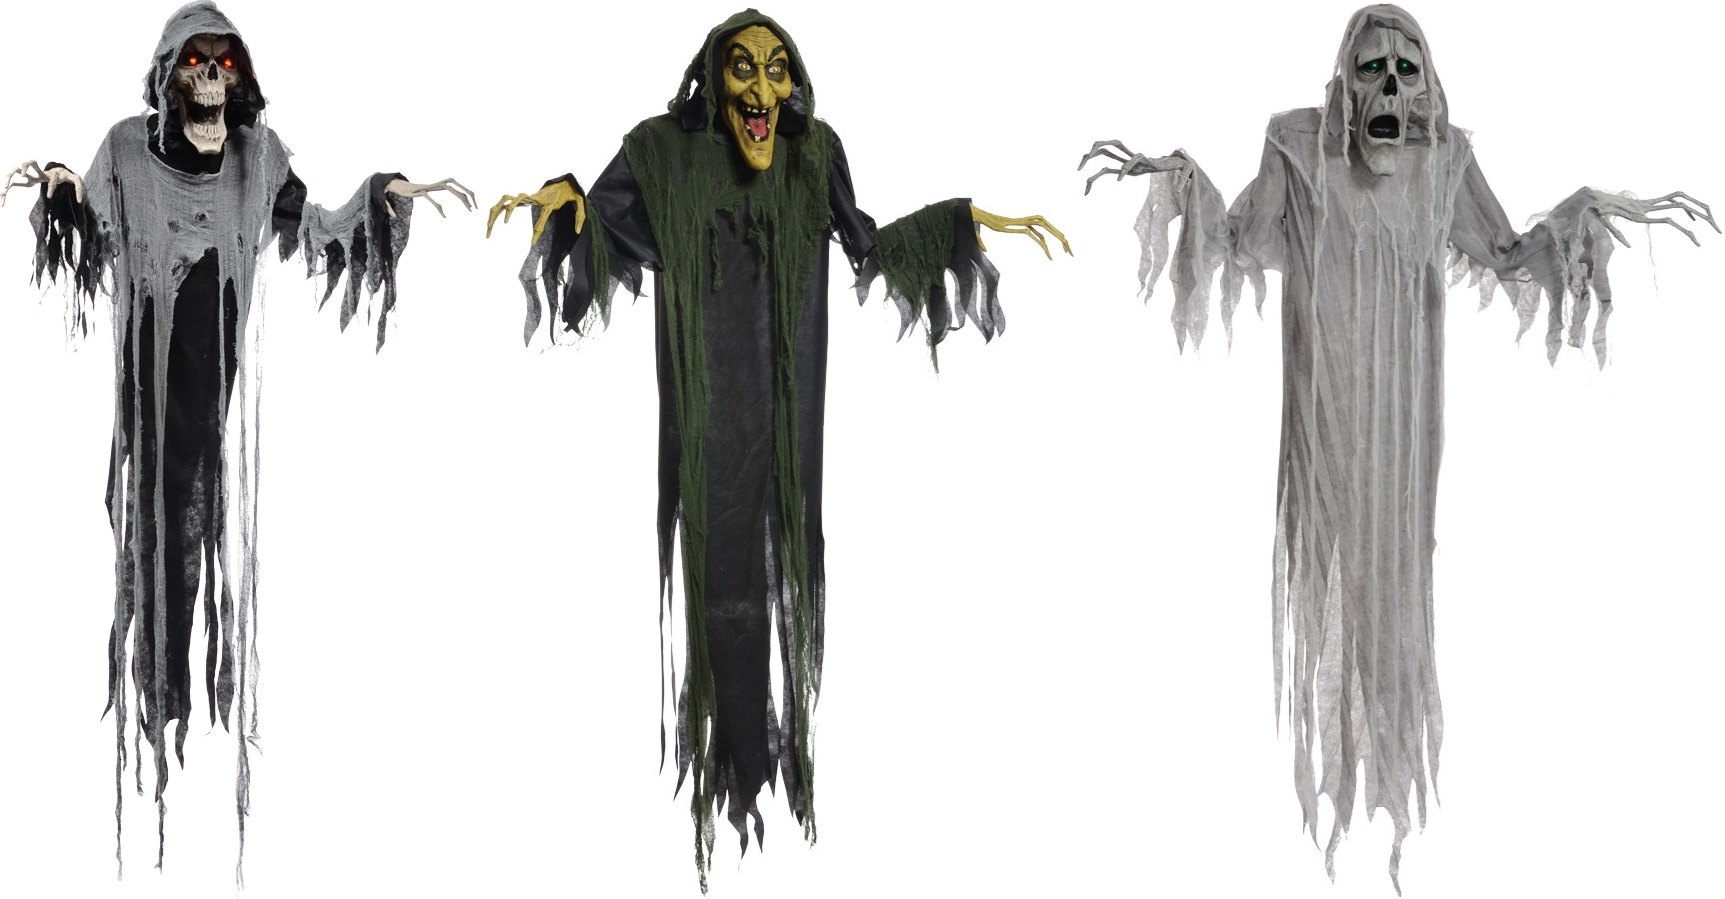 Picture of 3 Halloween Hanging Animated Props Witch Reaper Phantom